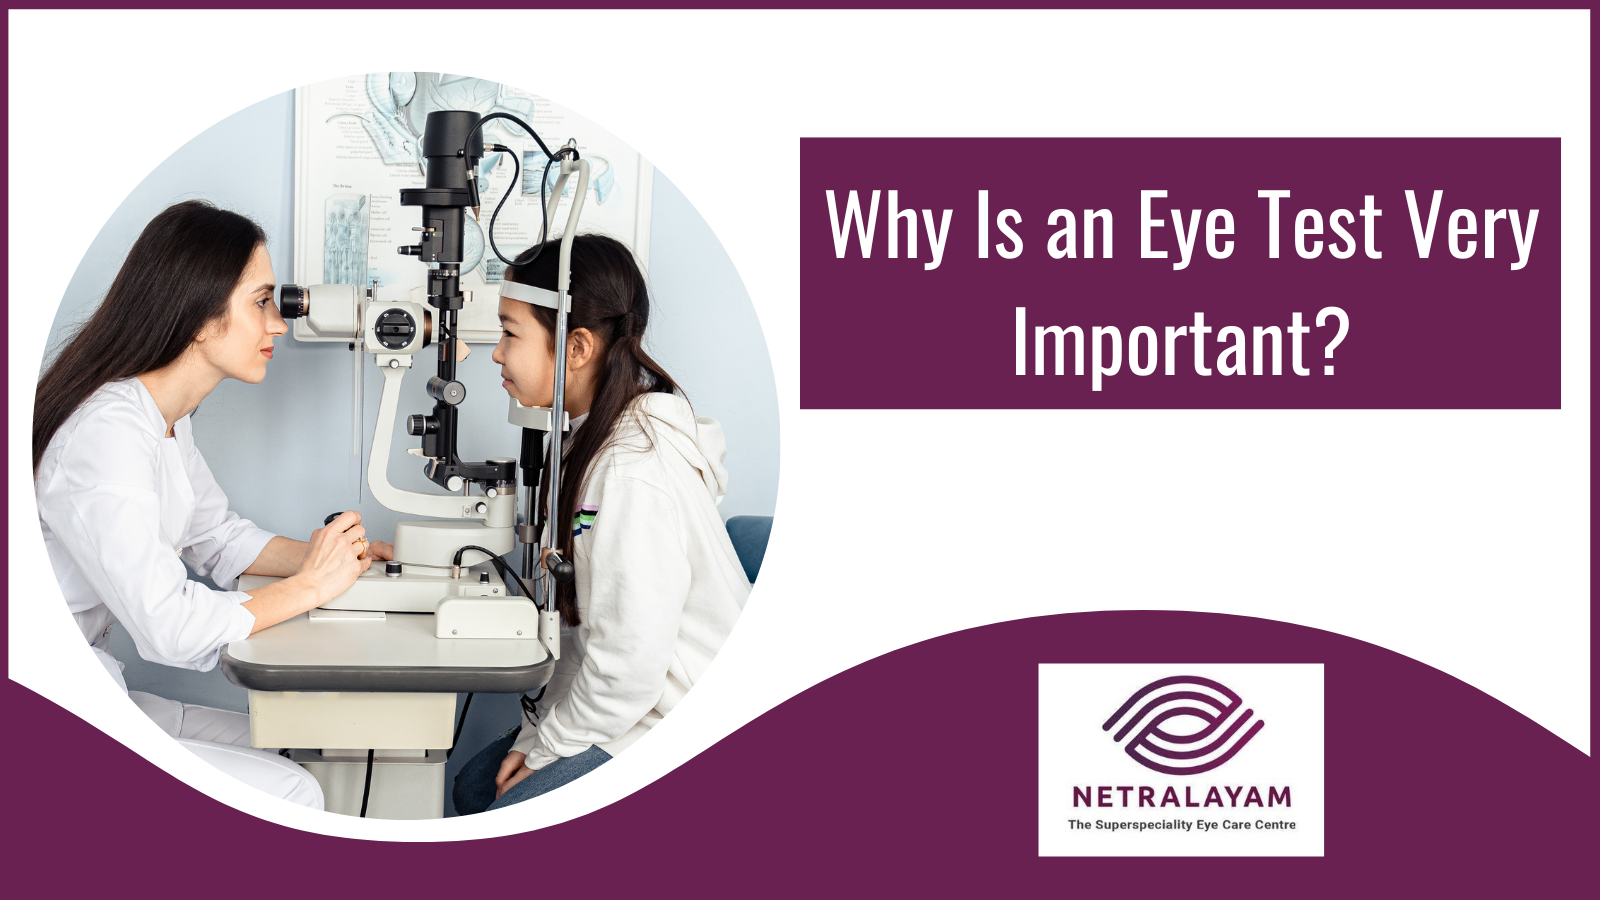 Why Is an Eye Test Very Important?